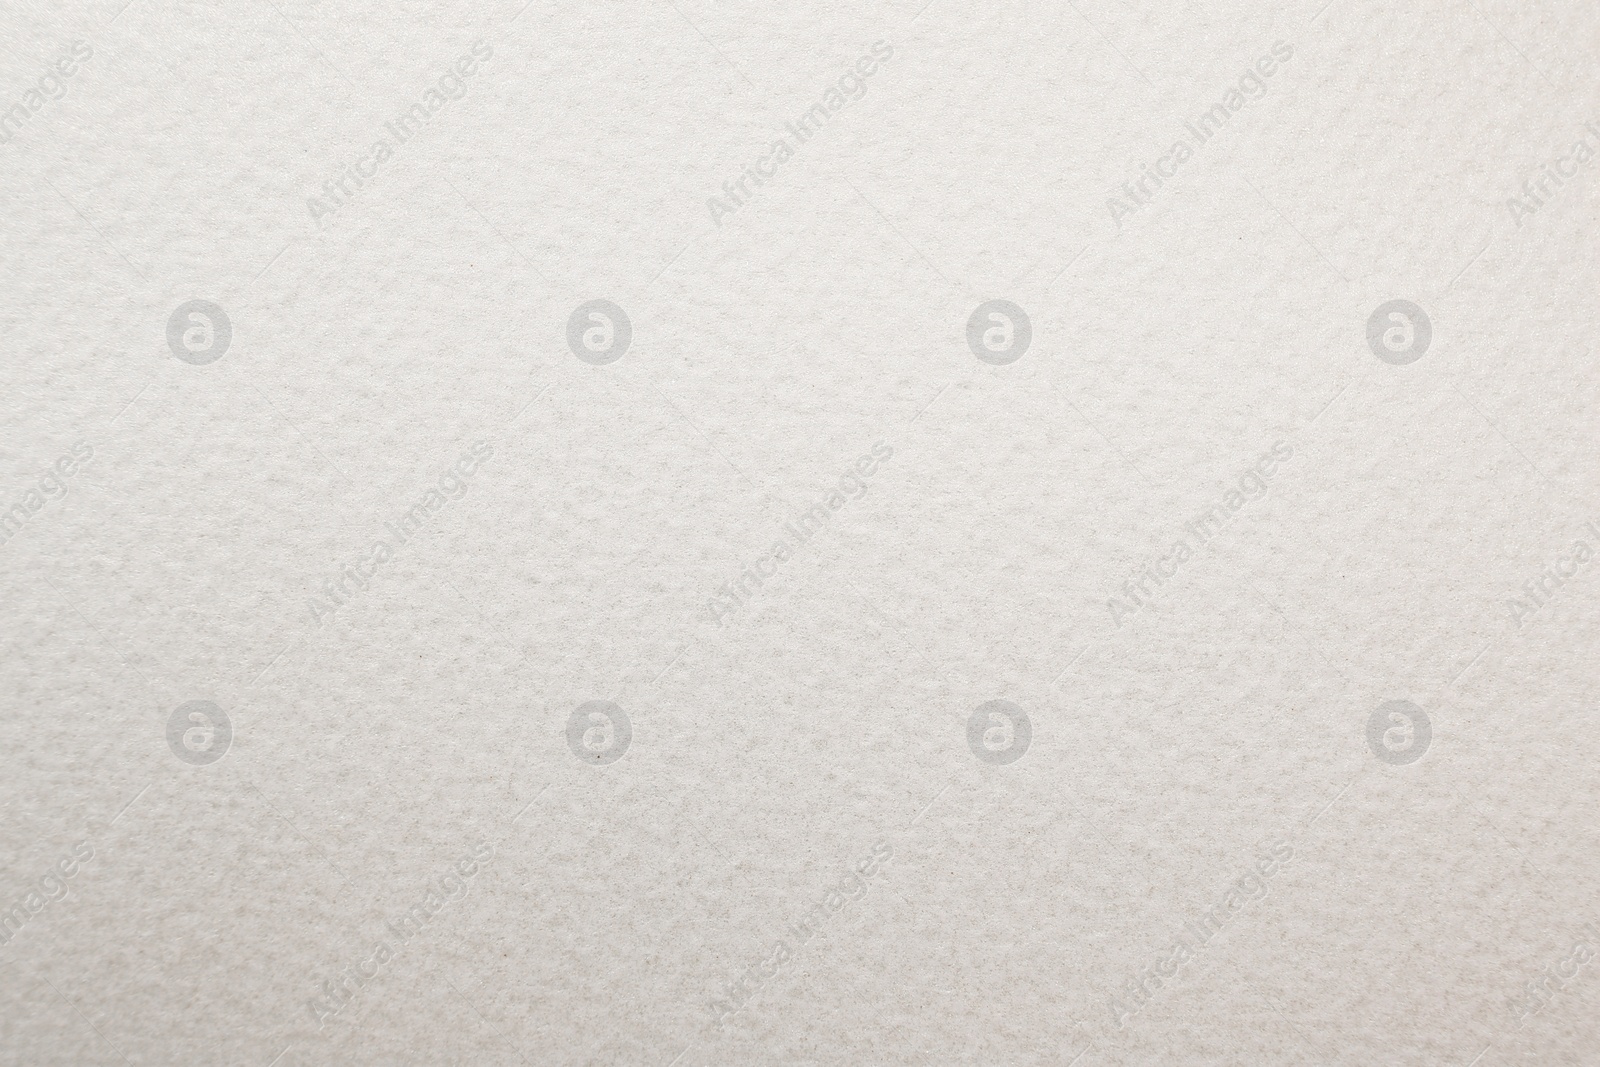 Photo of Texture of white paper as background, closeup view